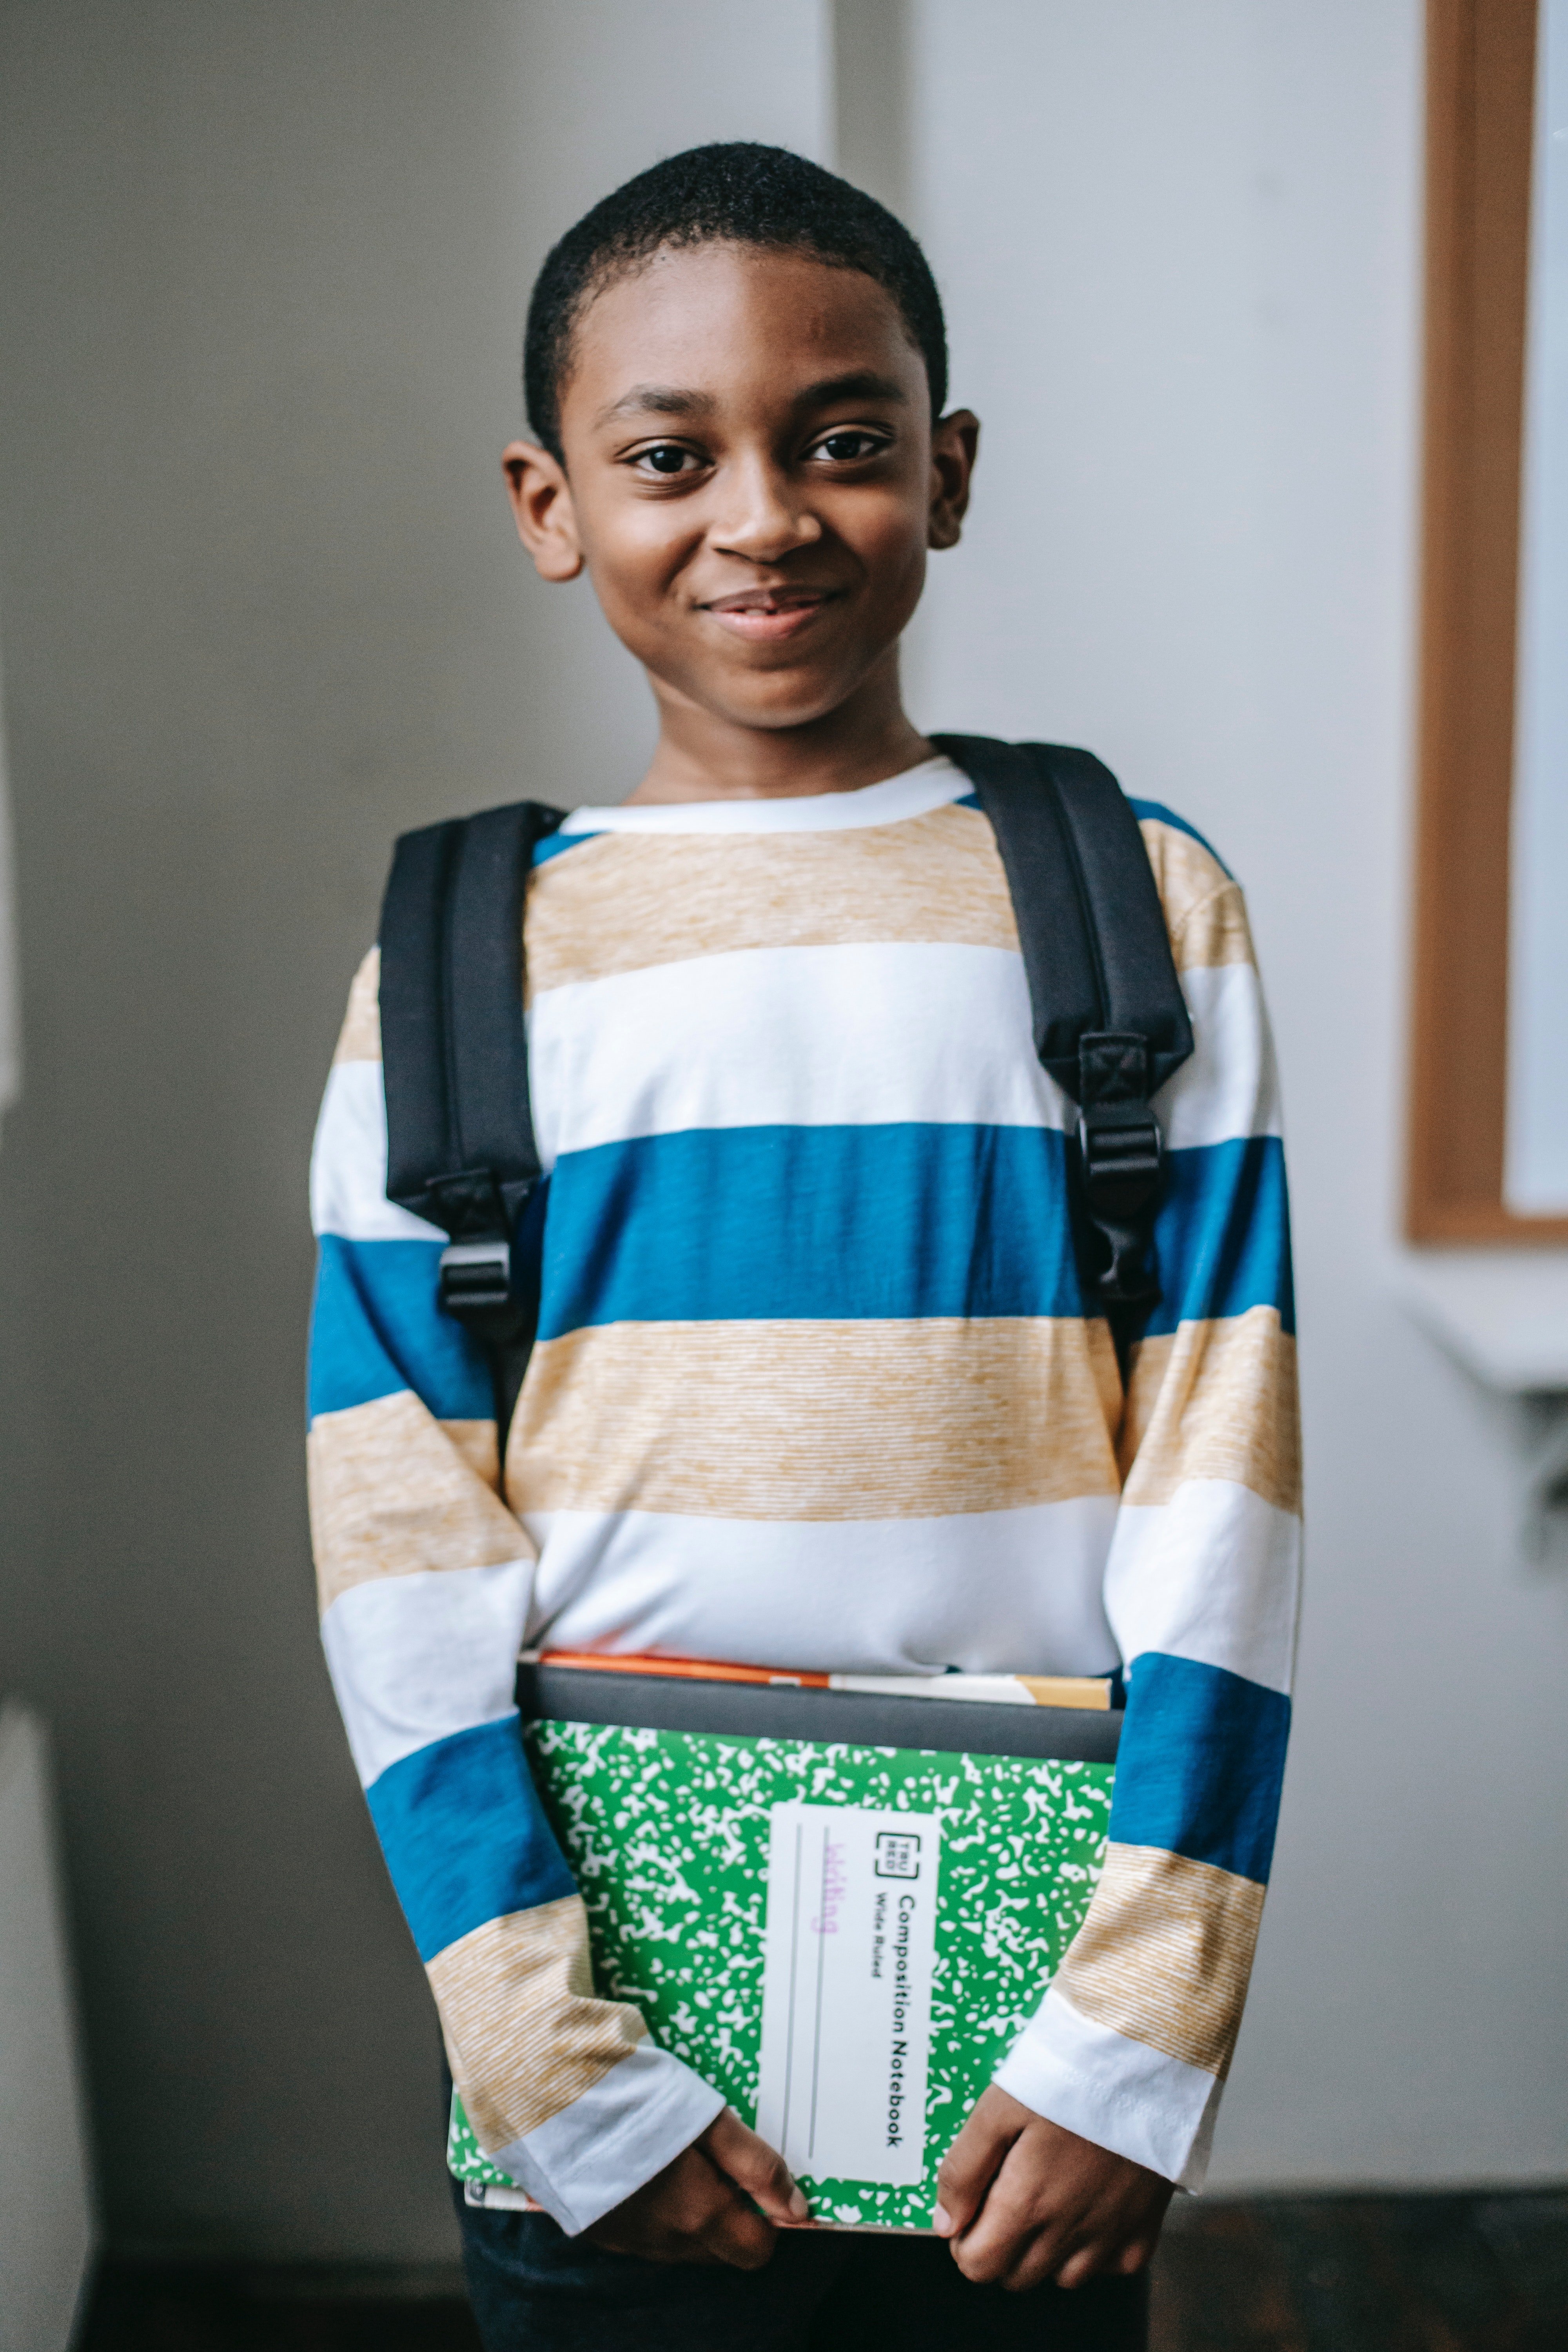 Little Johnny stayed calm and tackled his teacher's questions confidently. | Photo: Pexels